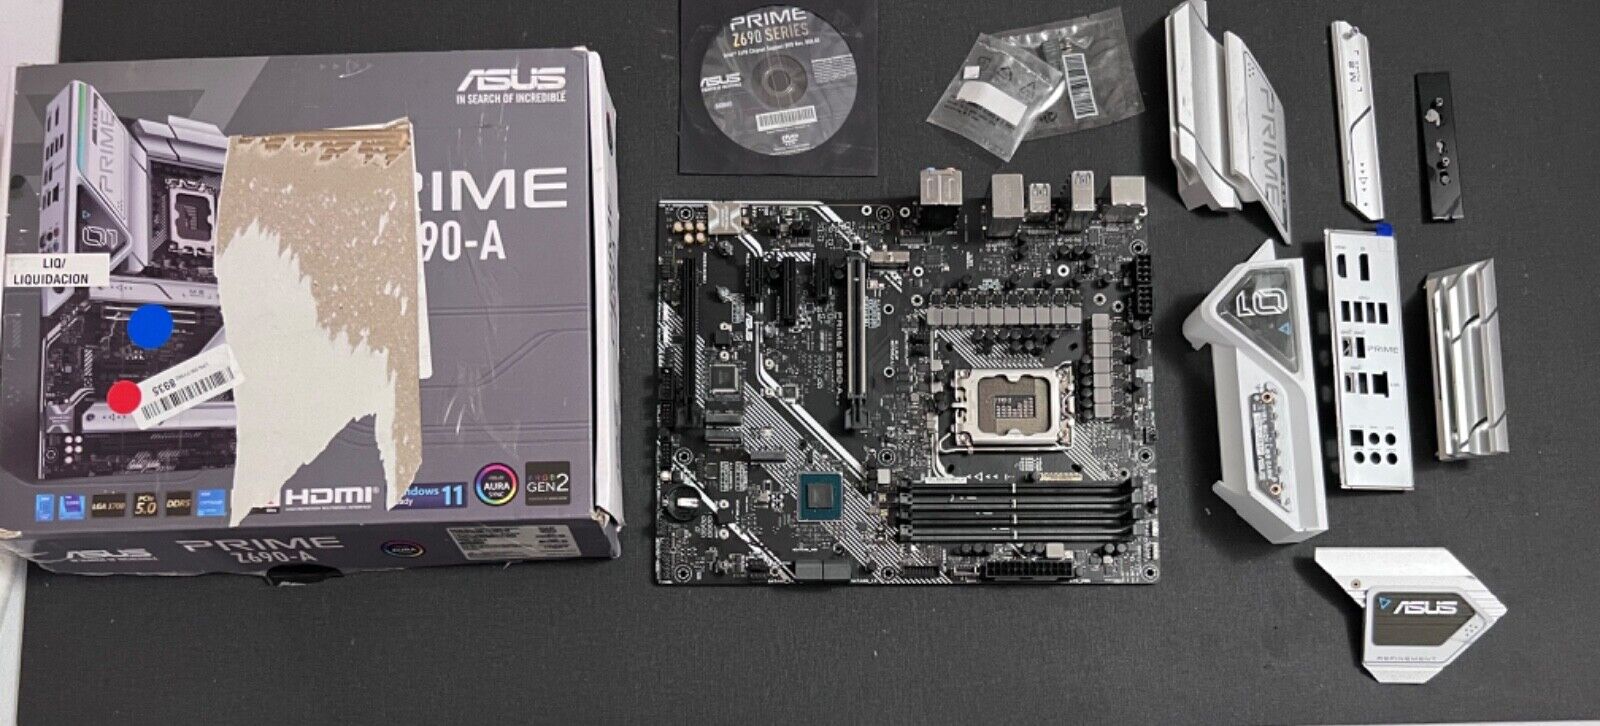 As-is Damaged ASUS PRIME Z690-A DDR4, LGA 1700, Intel Motherboard